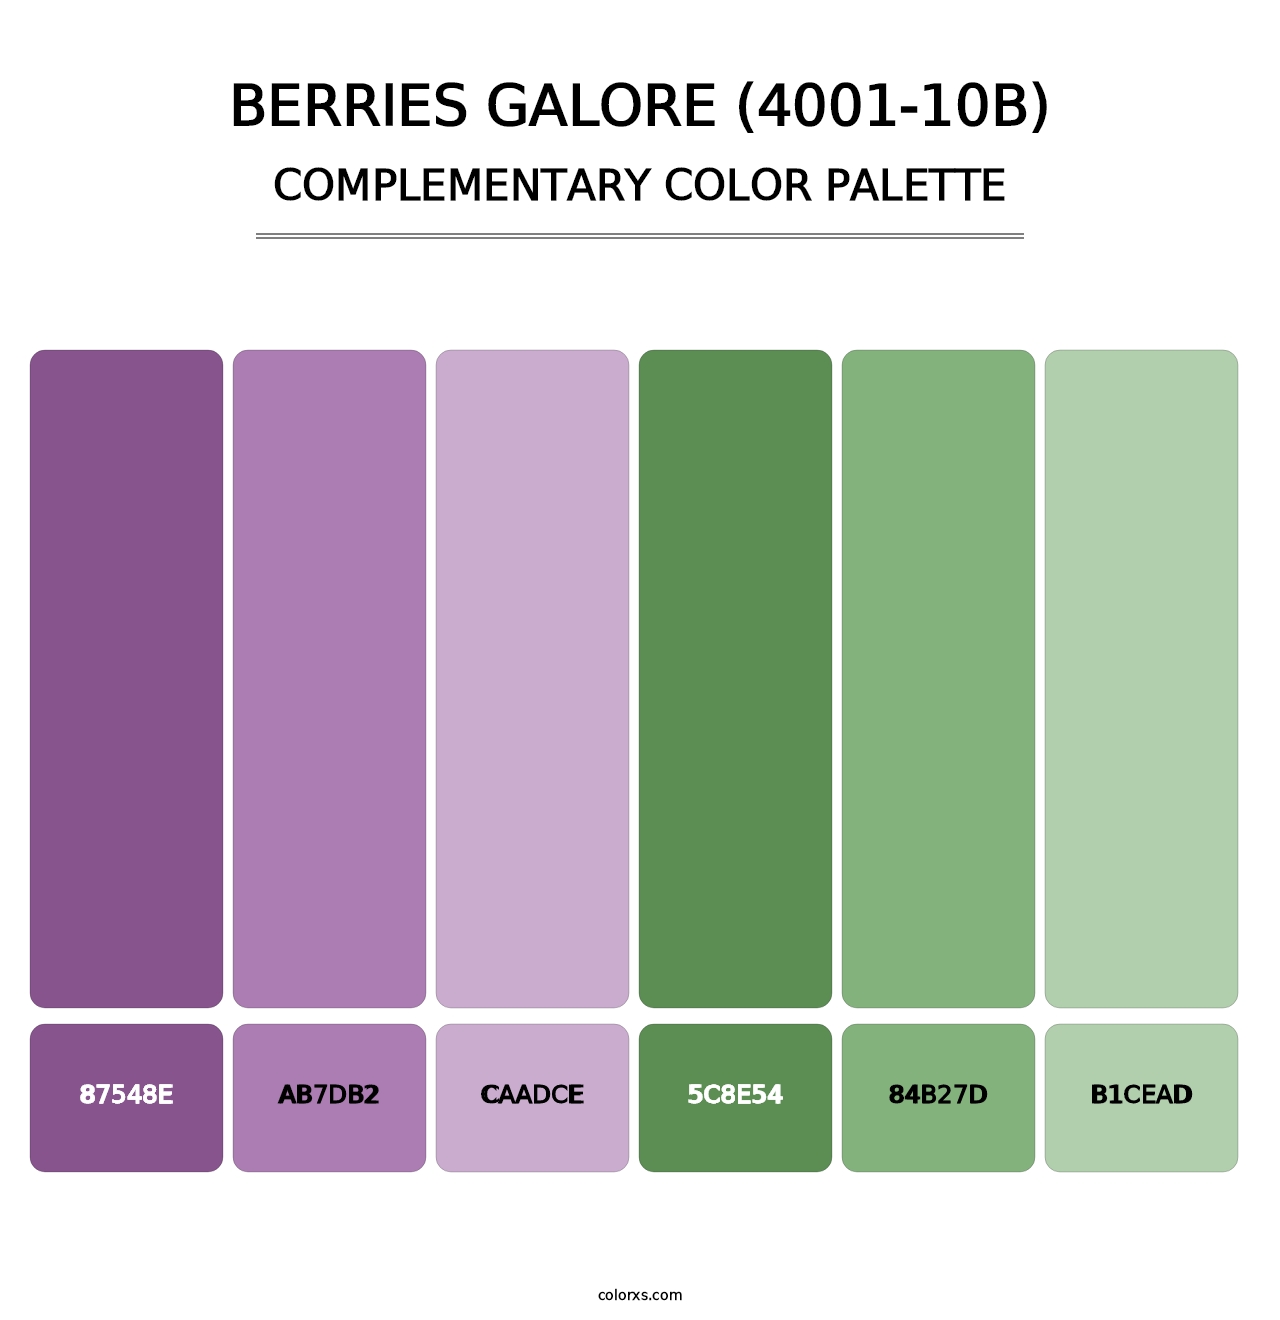 Berries Galore (4001-10B) - Complementary Color Palette